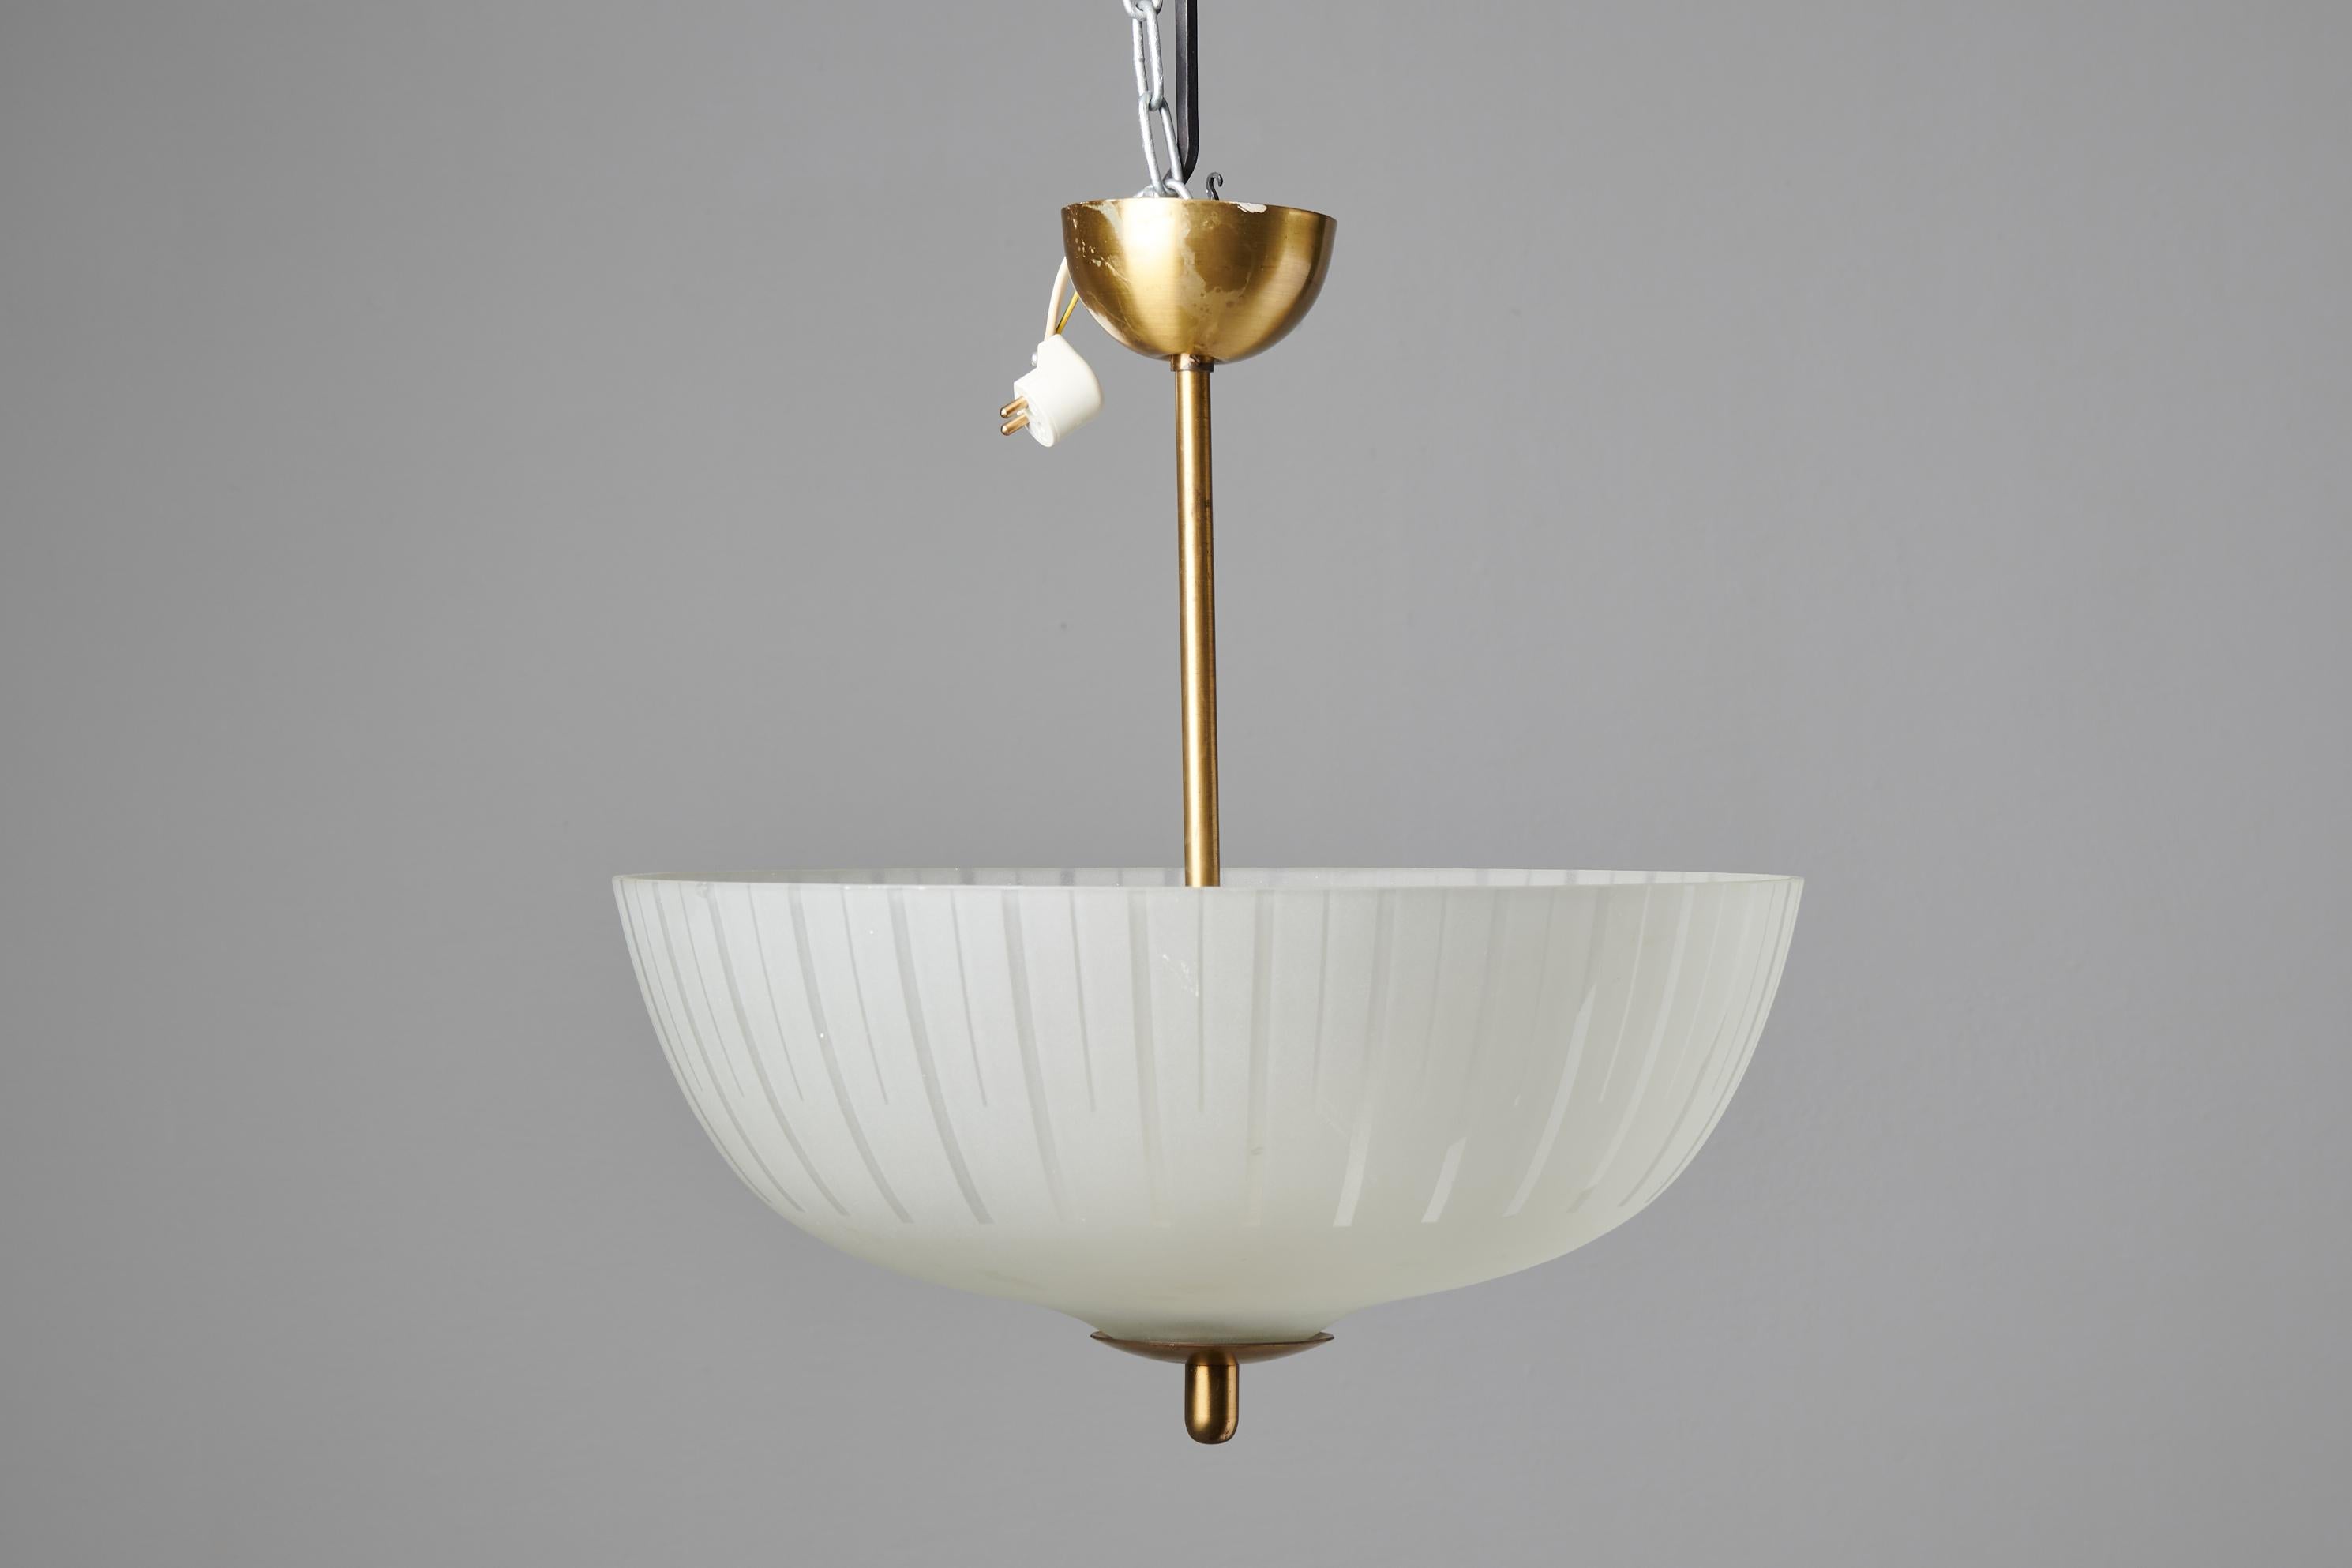 Vintage Swedish ceiling light from around the 1940 with a cover in glass and suspension in brass. The light has three light sources and the glass cover has a subtle geometric design which filters the light nicely. The cover has a small insignificant